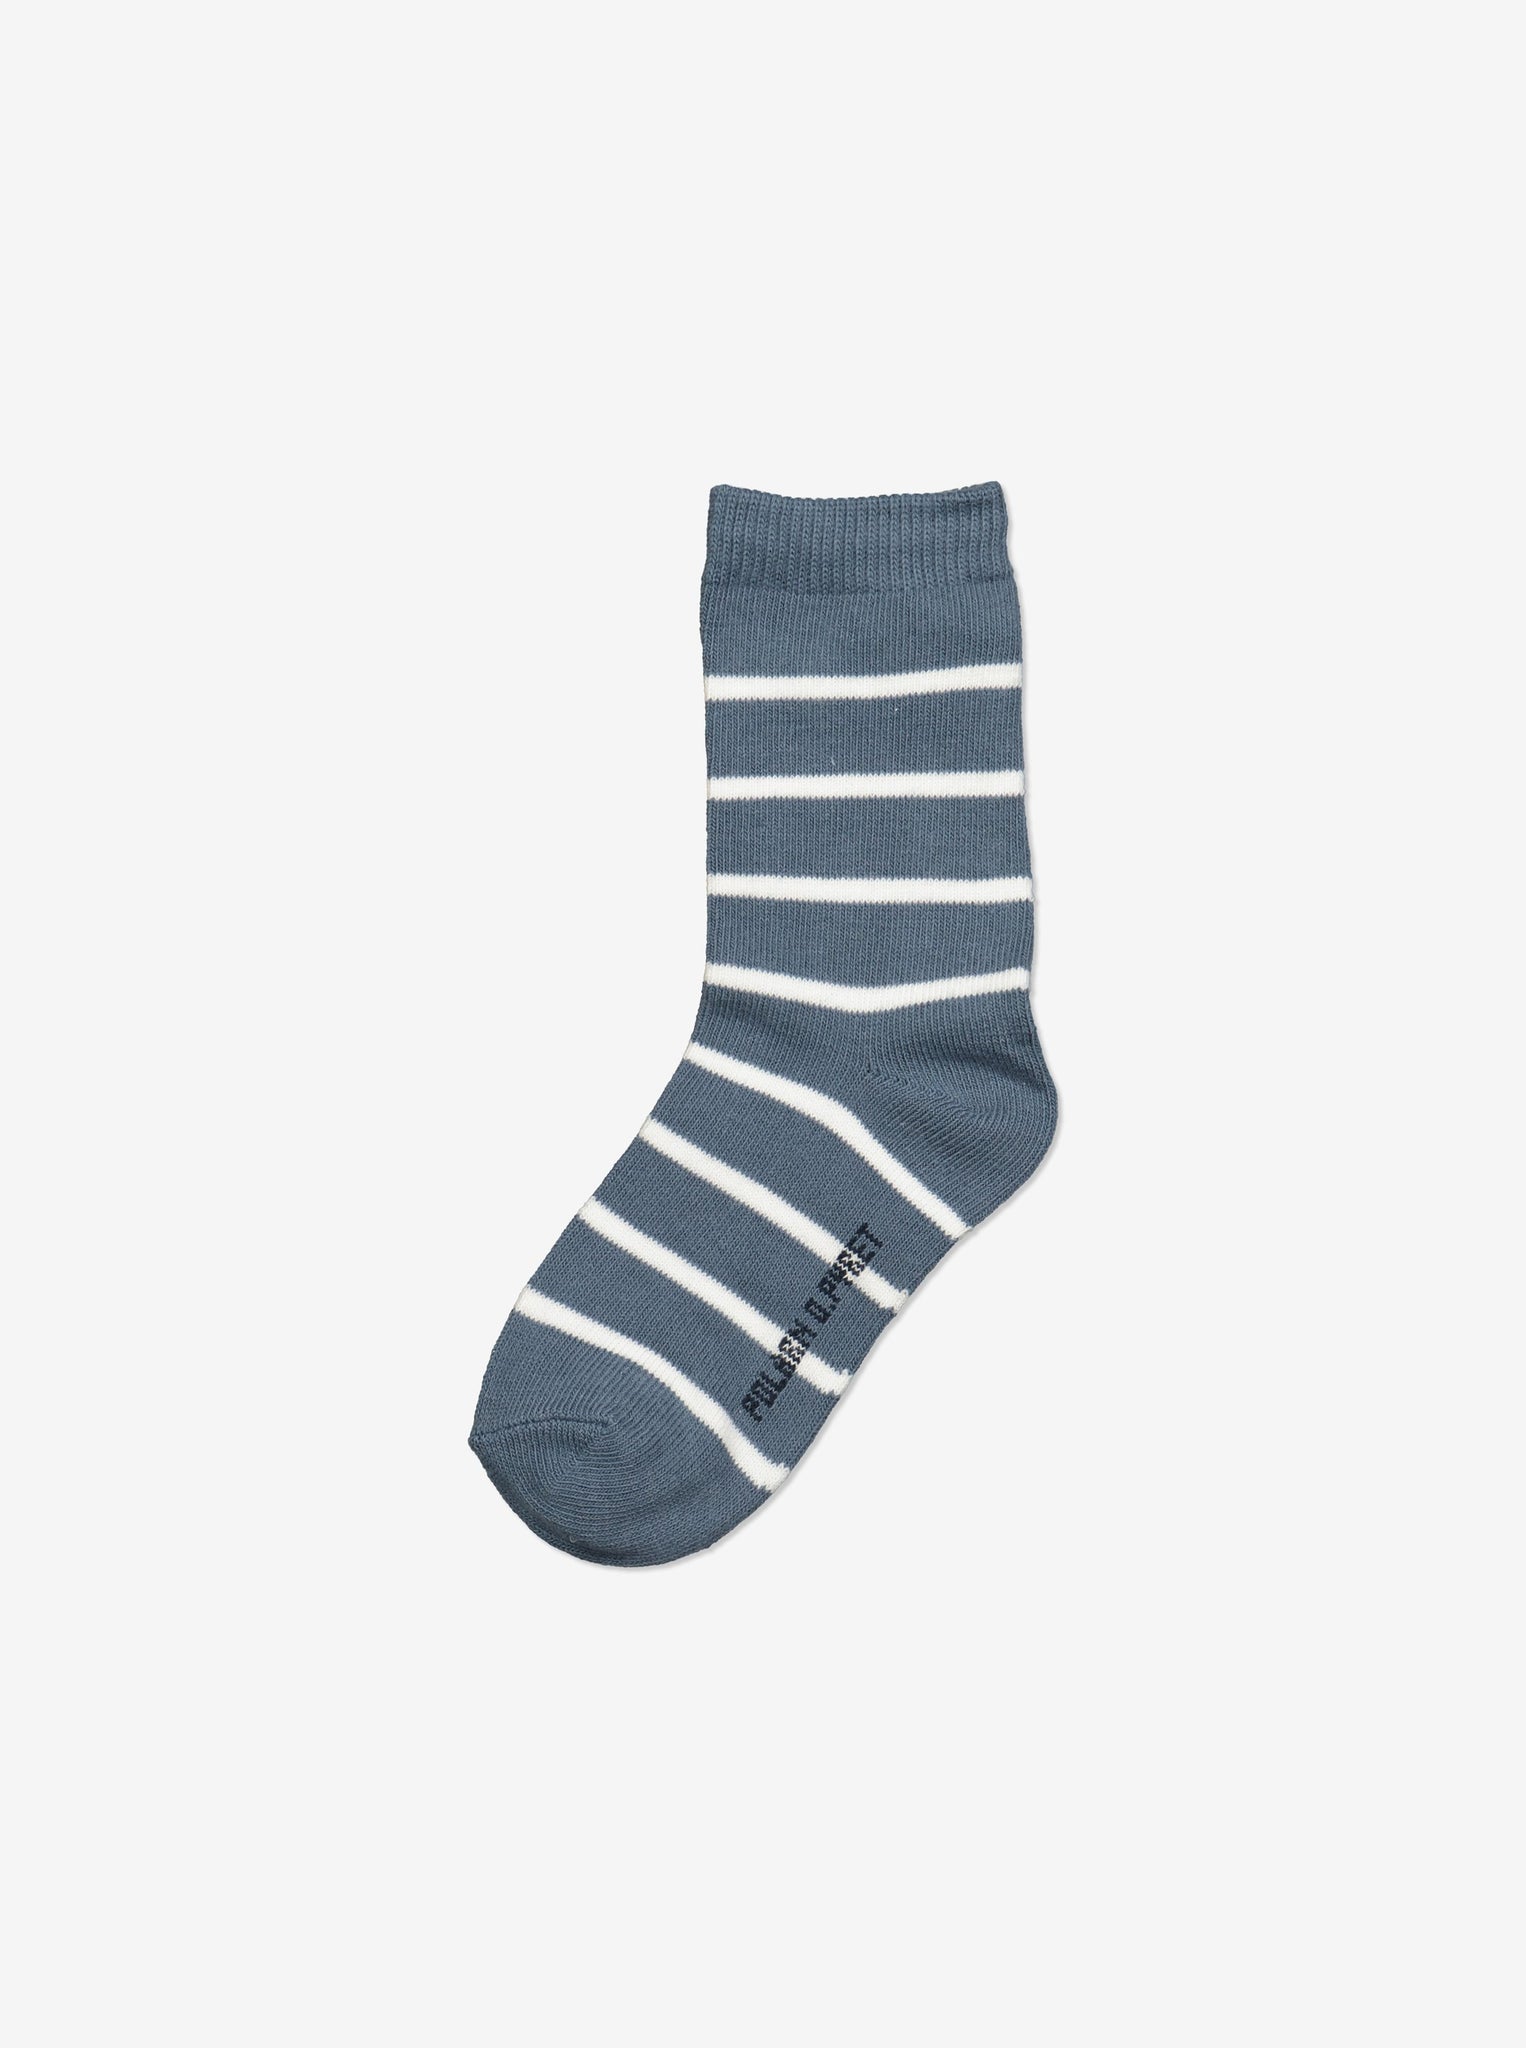  Organic Blue Kids Socks Multipack from Polarn O. Pyret Kidswear. Made from eco-friendly materials.